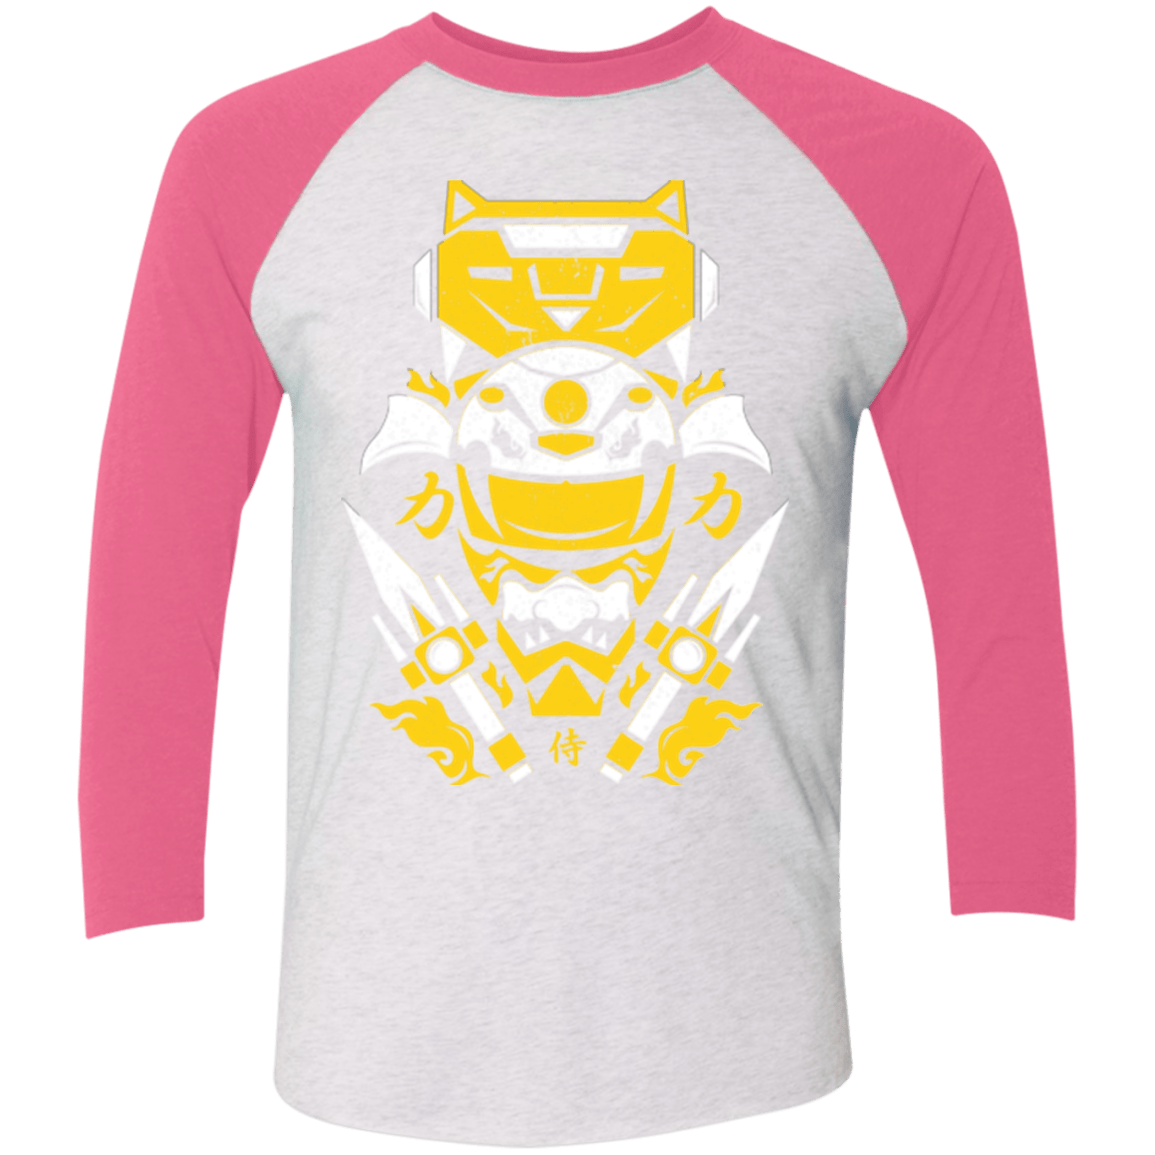 T-Shirts Heather White/Vintage Pink / X-Small Yellow Ranger Men's Triblend 3/4 Sleeve